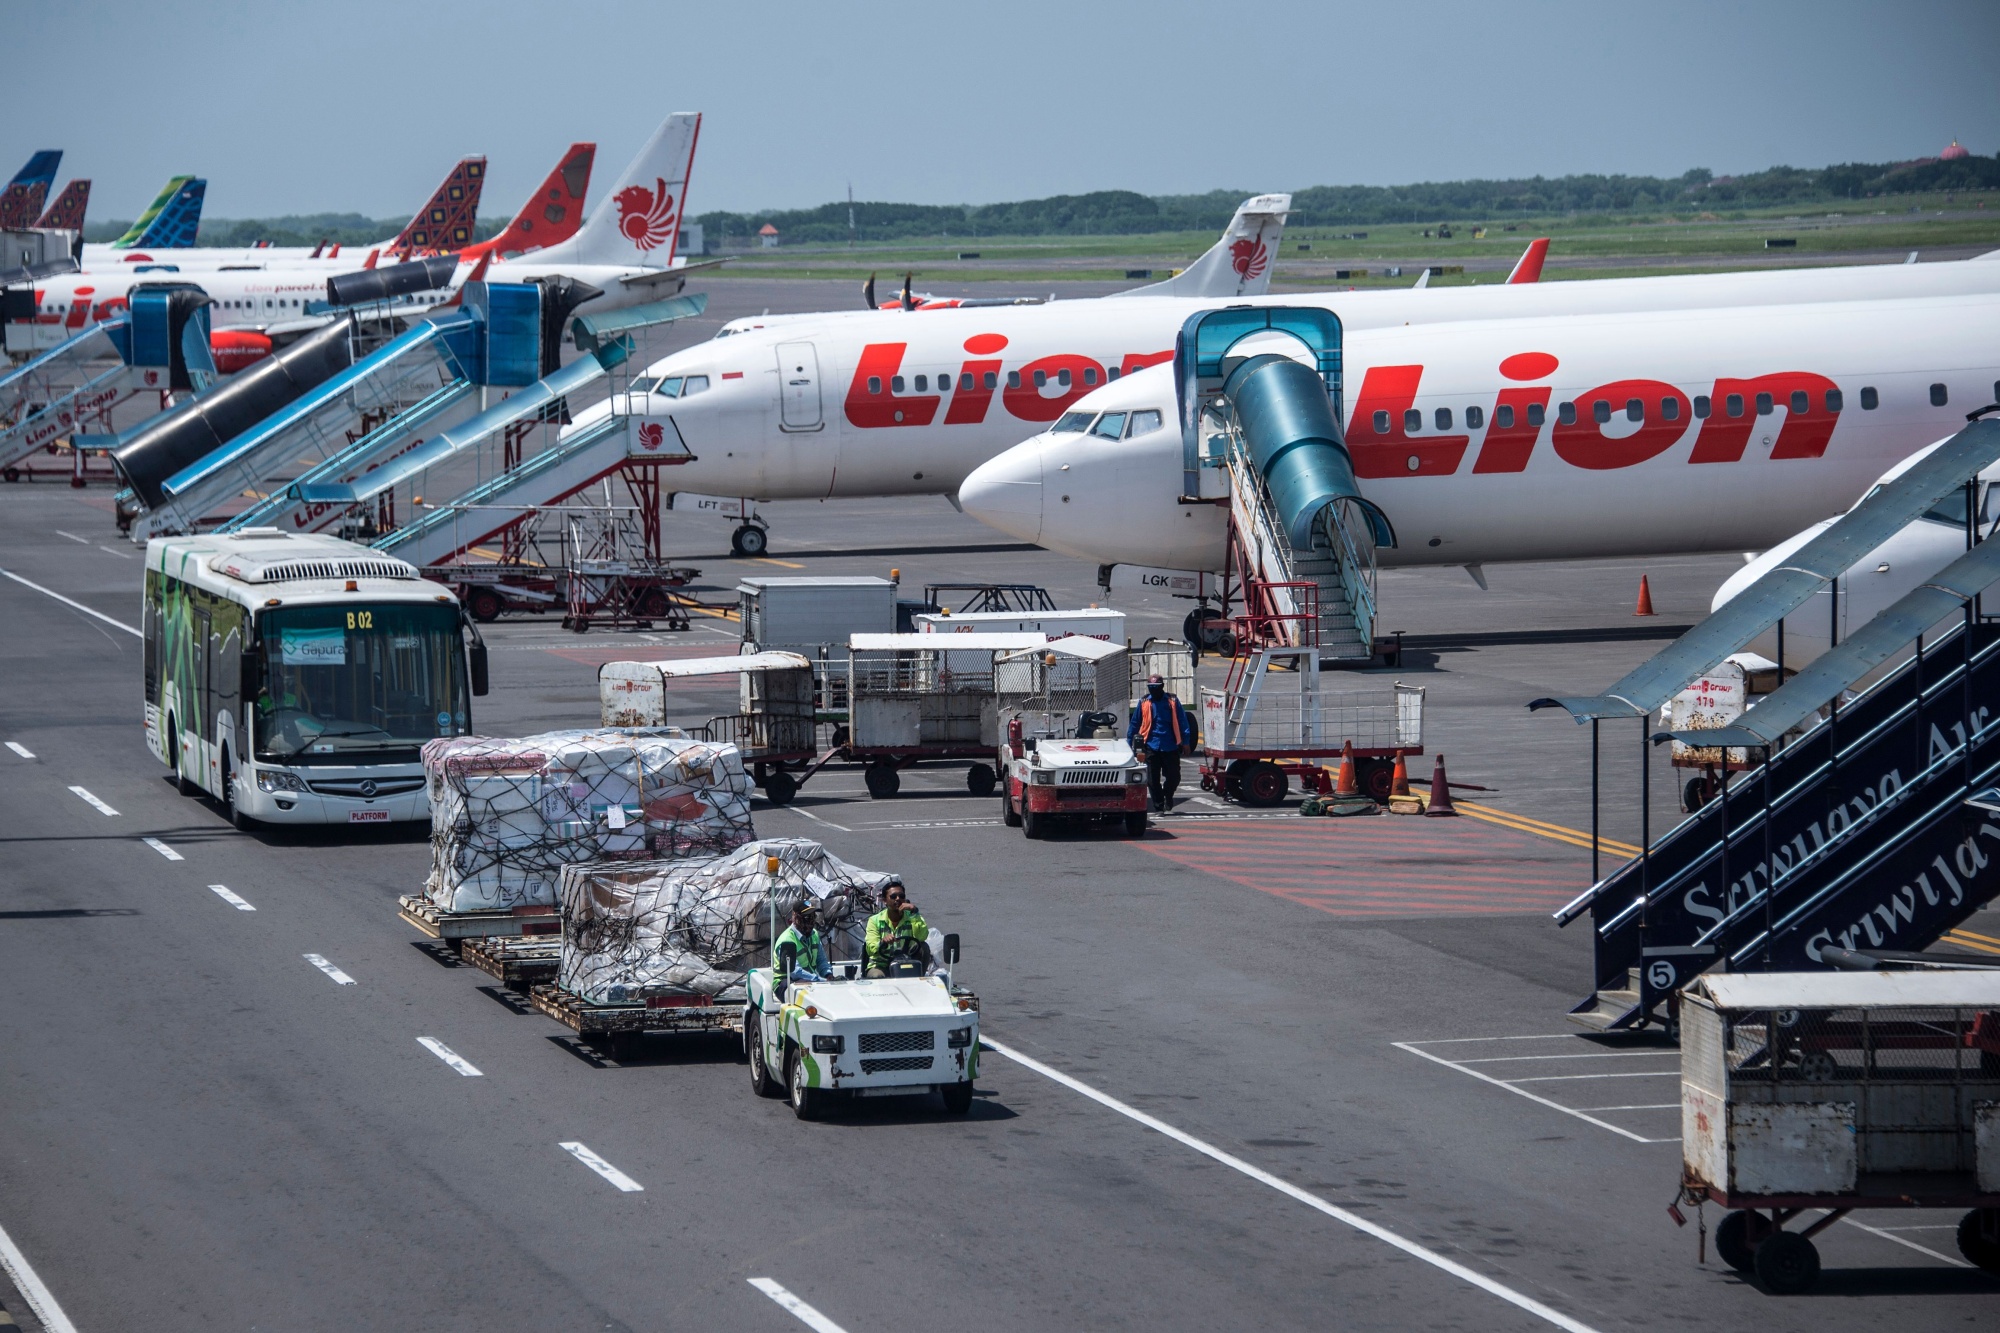 Lion Air aircraft are parked on the tarmac at Juanda International airport in Surabaya, Indonesia on April 24.